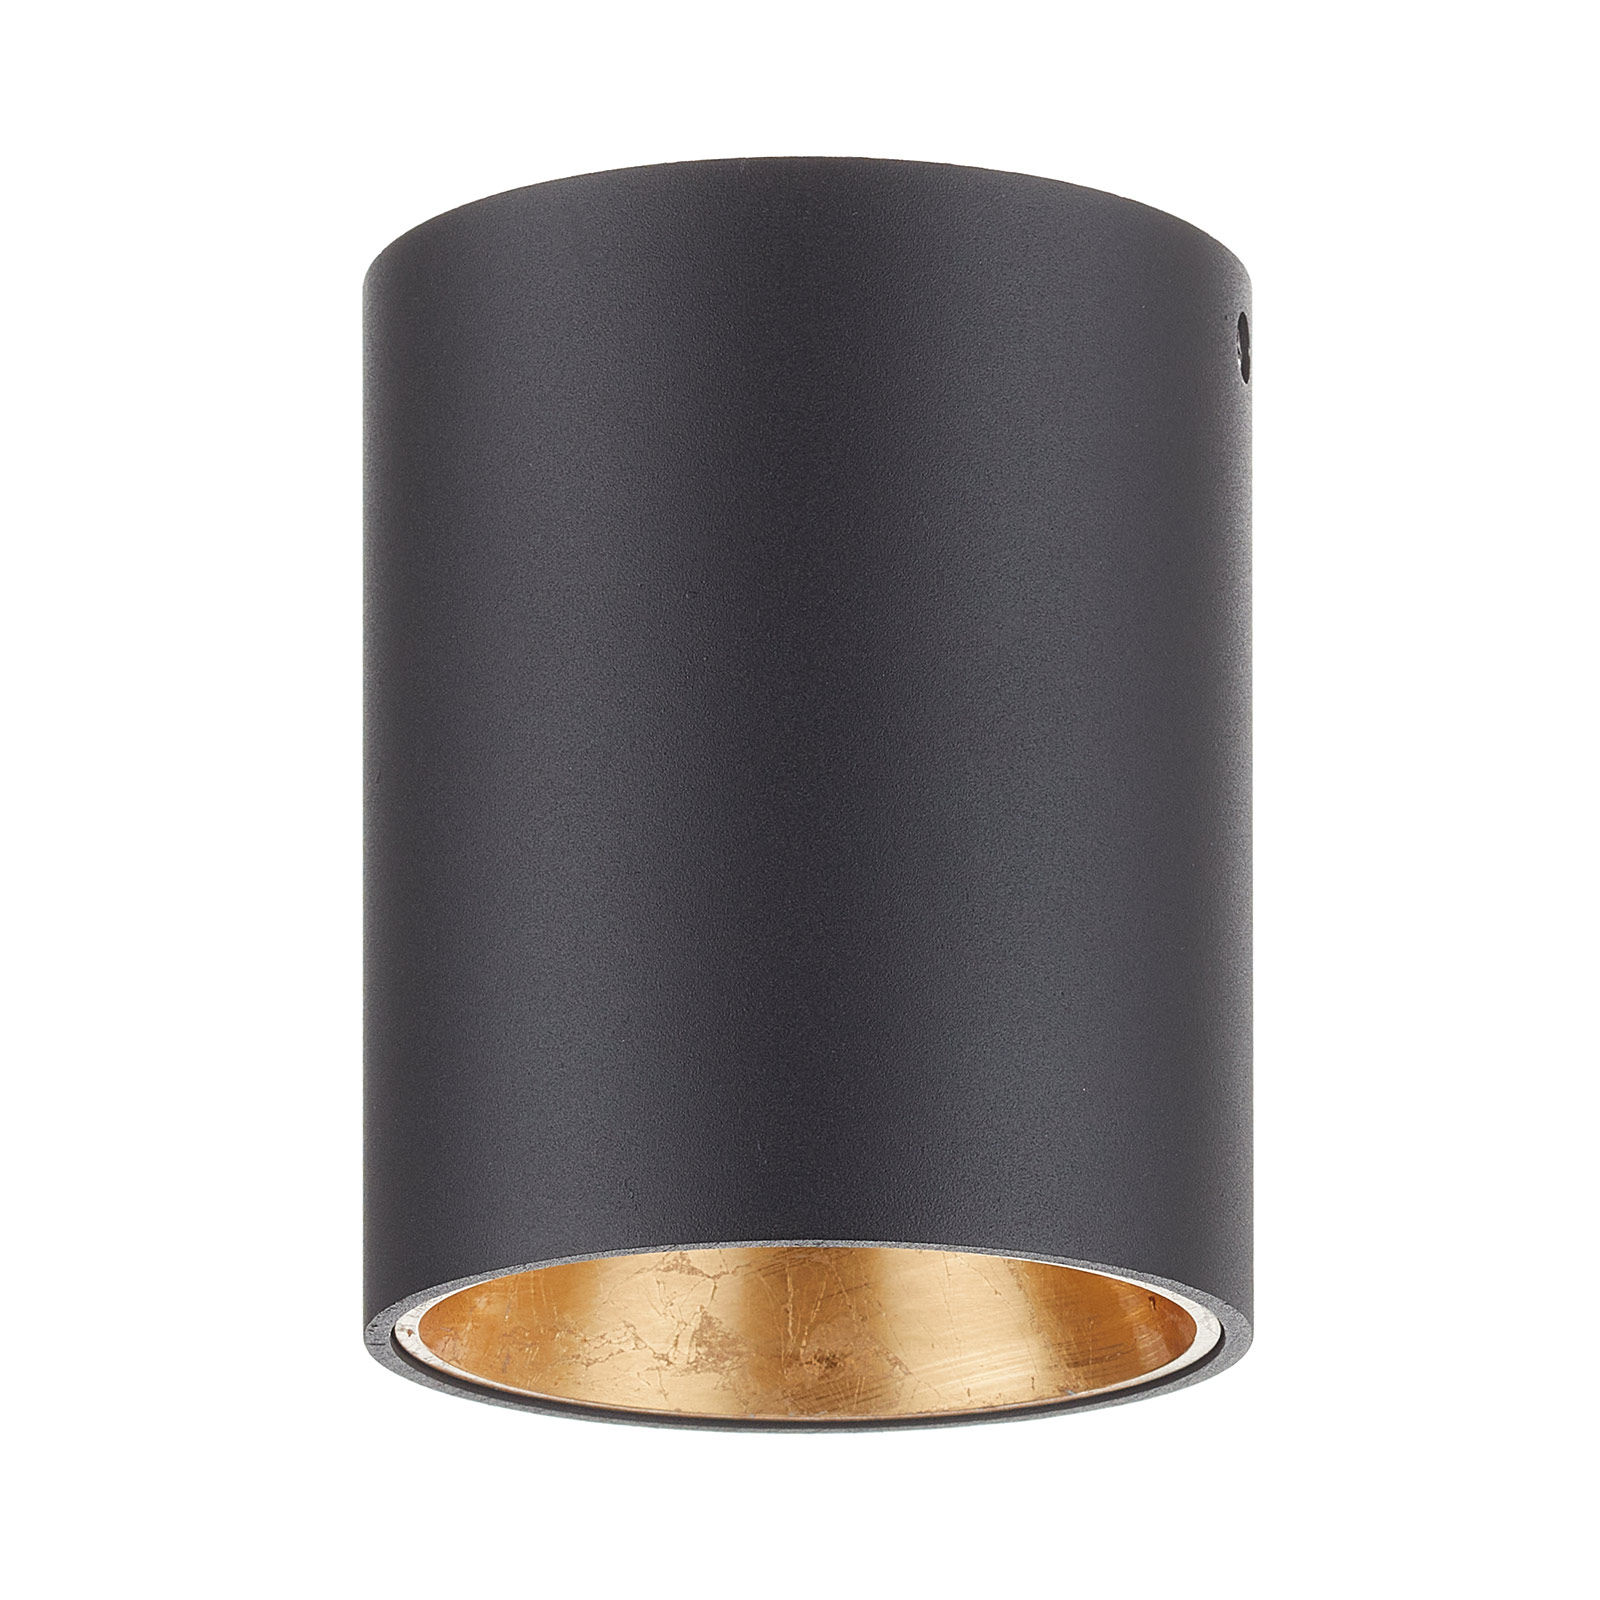 Polasso LED ceiling lamp round, black and gold